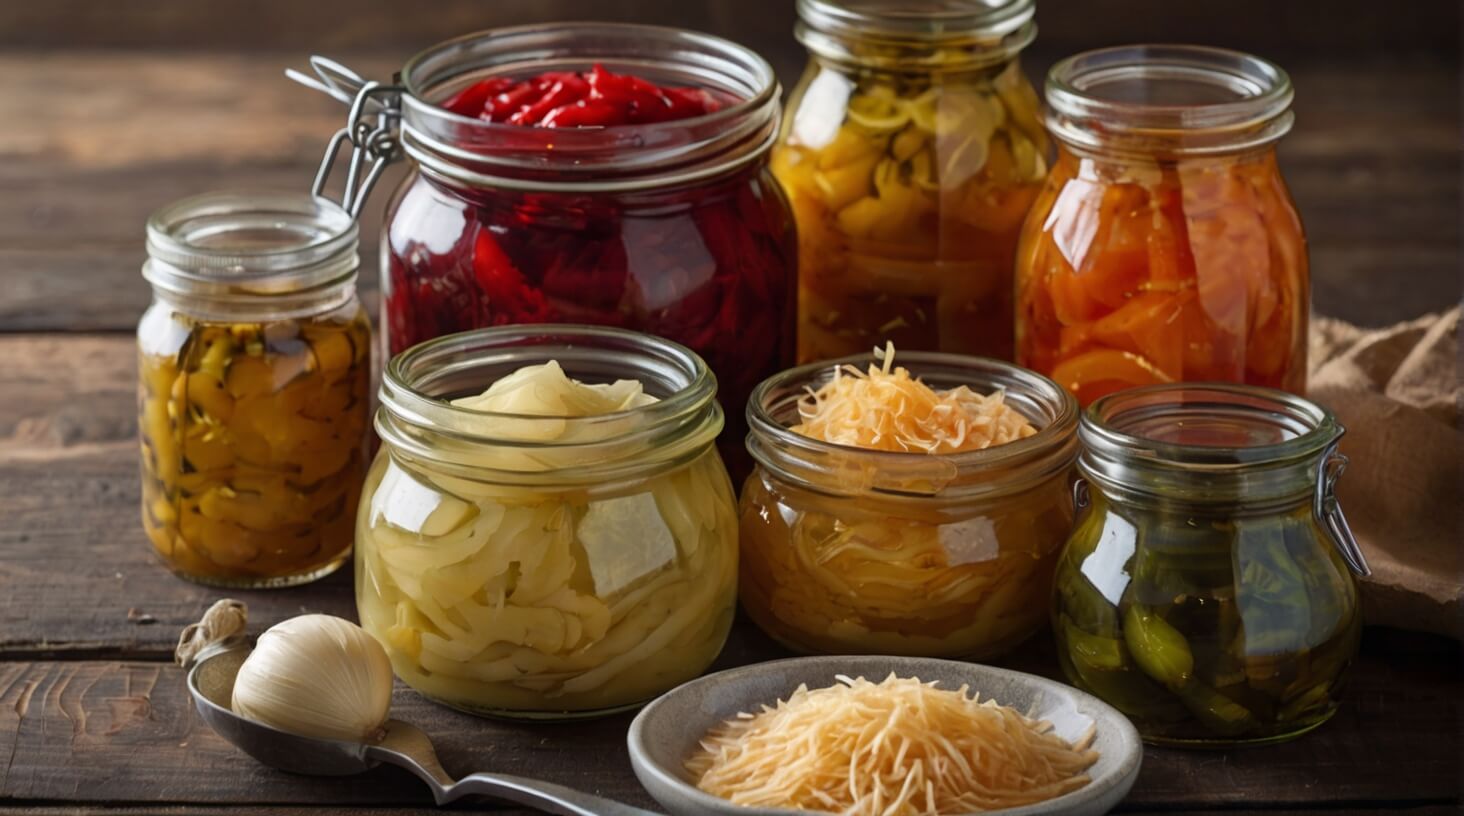 A variety of fermented foods including kimchi, sauerkraut, kombucha, and yogurt, symbolizing the diverse range of probiotic-rich options for gut health and overall well-being.